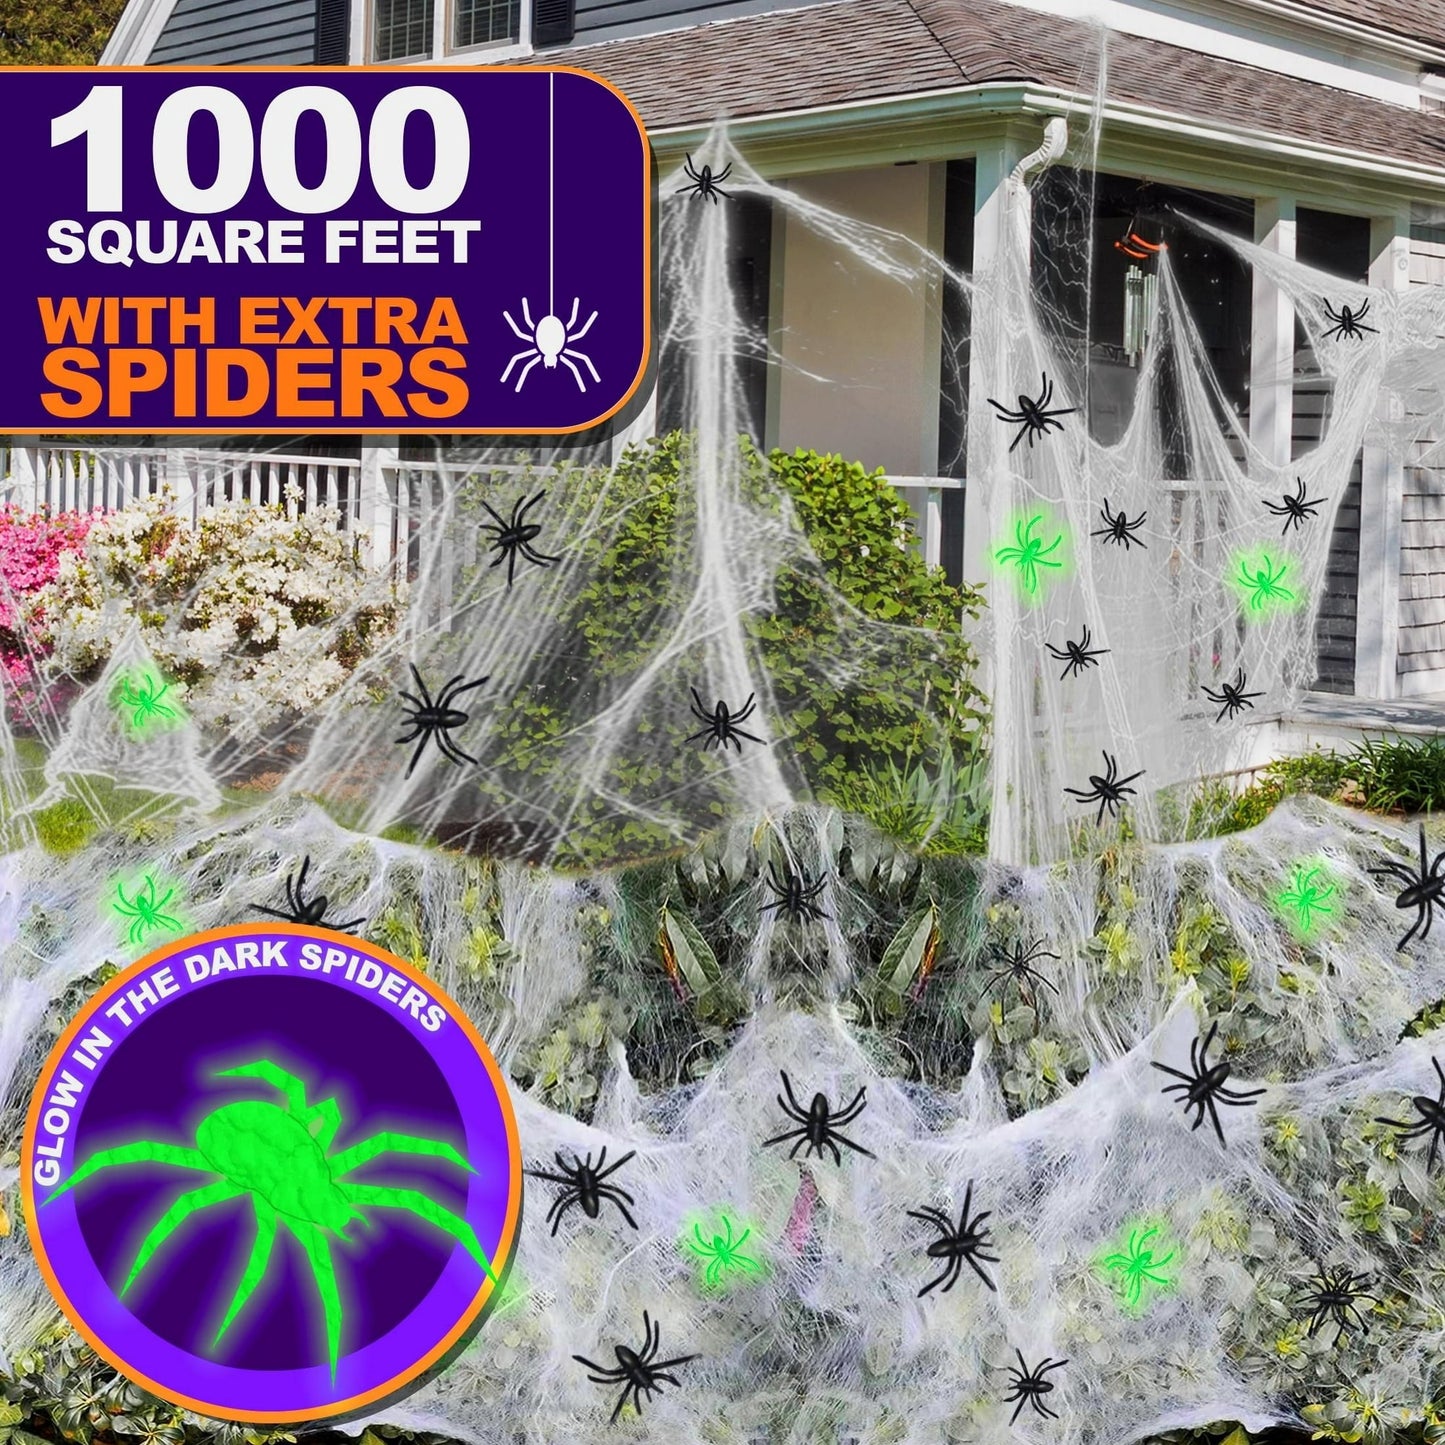 Glow-in-the-Dark Spider Web Decoration - Large and Intricate